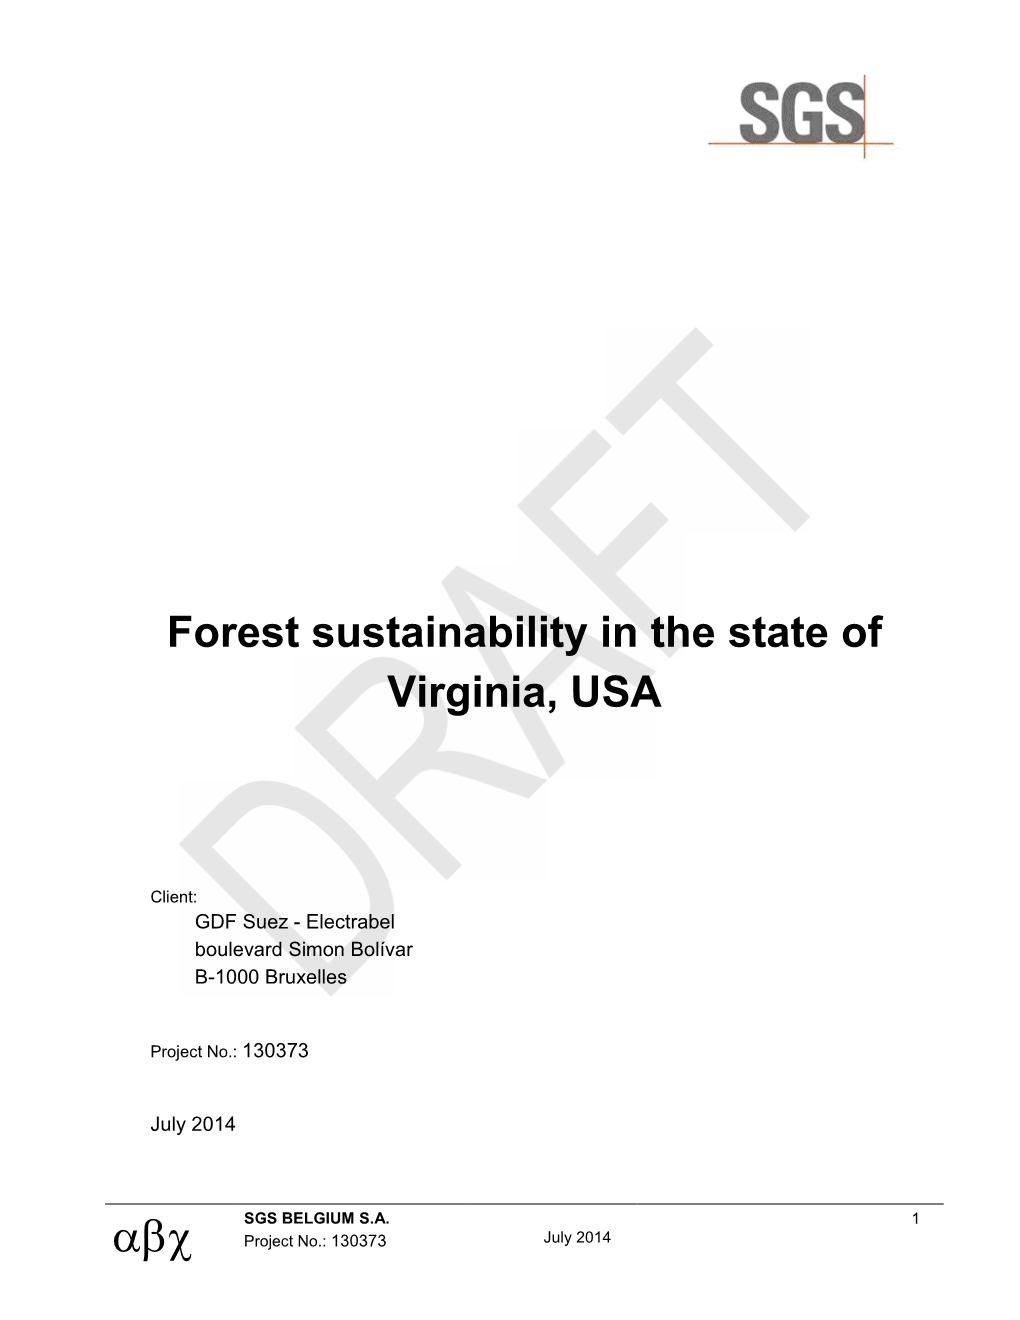 SGS Forest Sustainability in Virginia